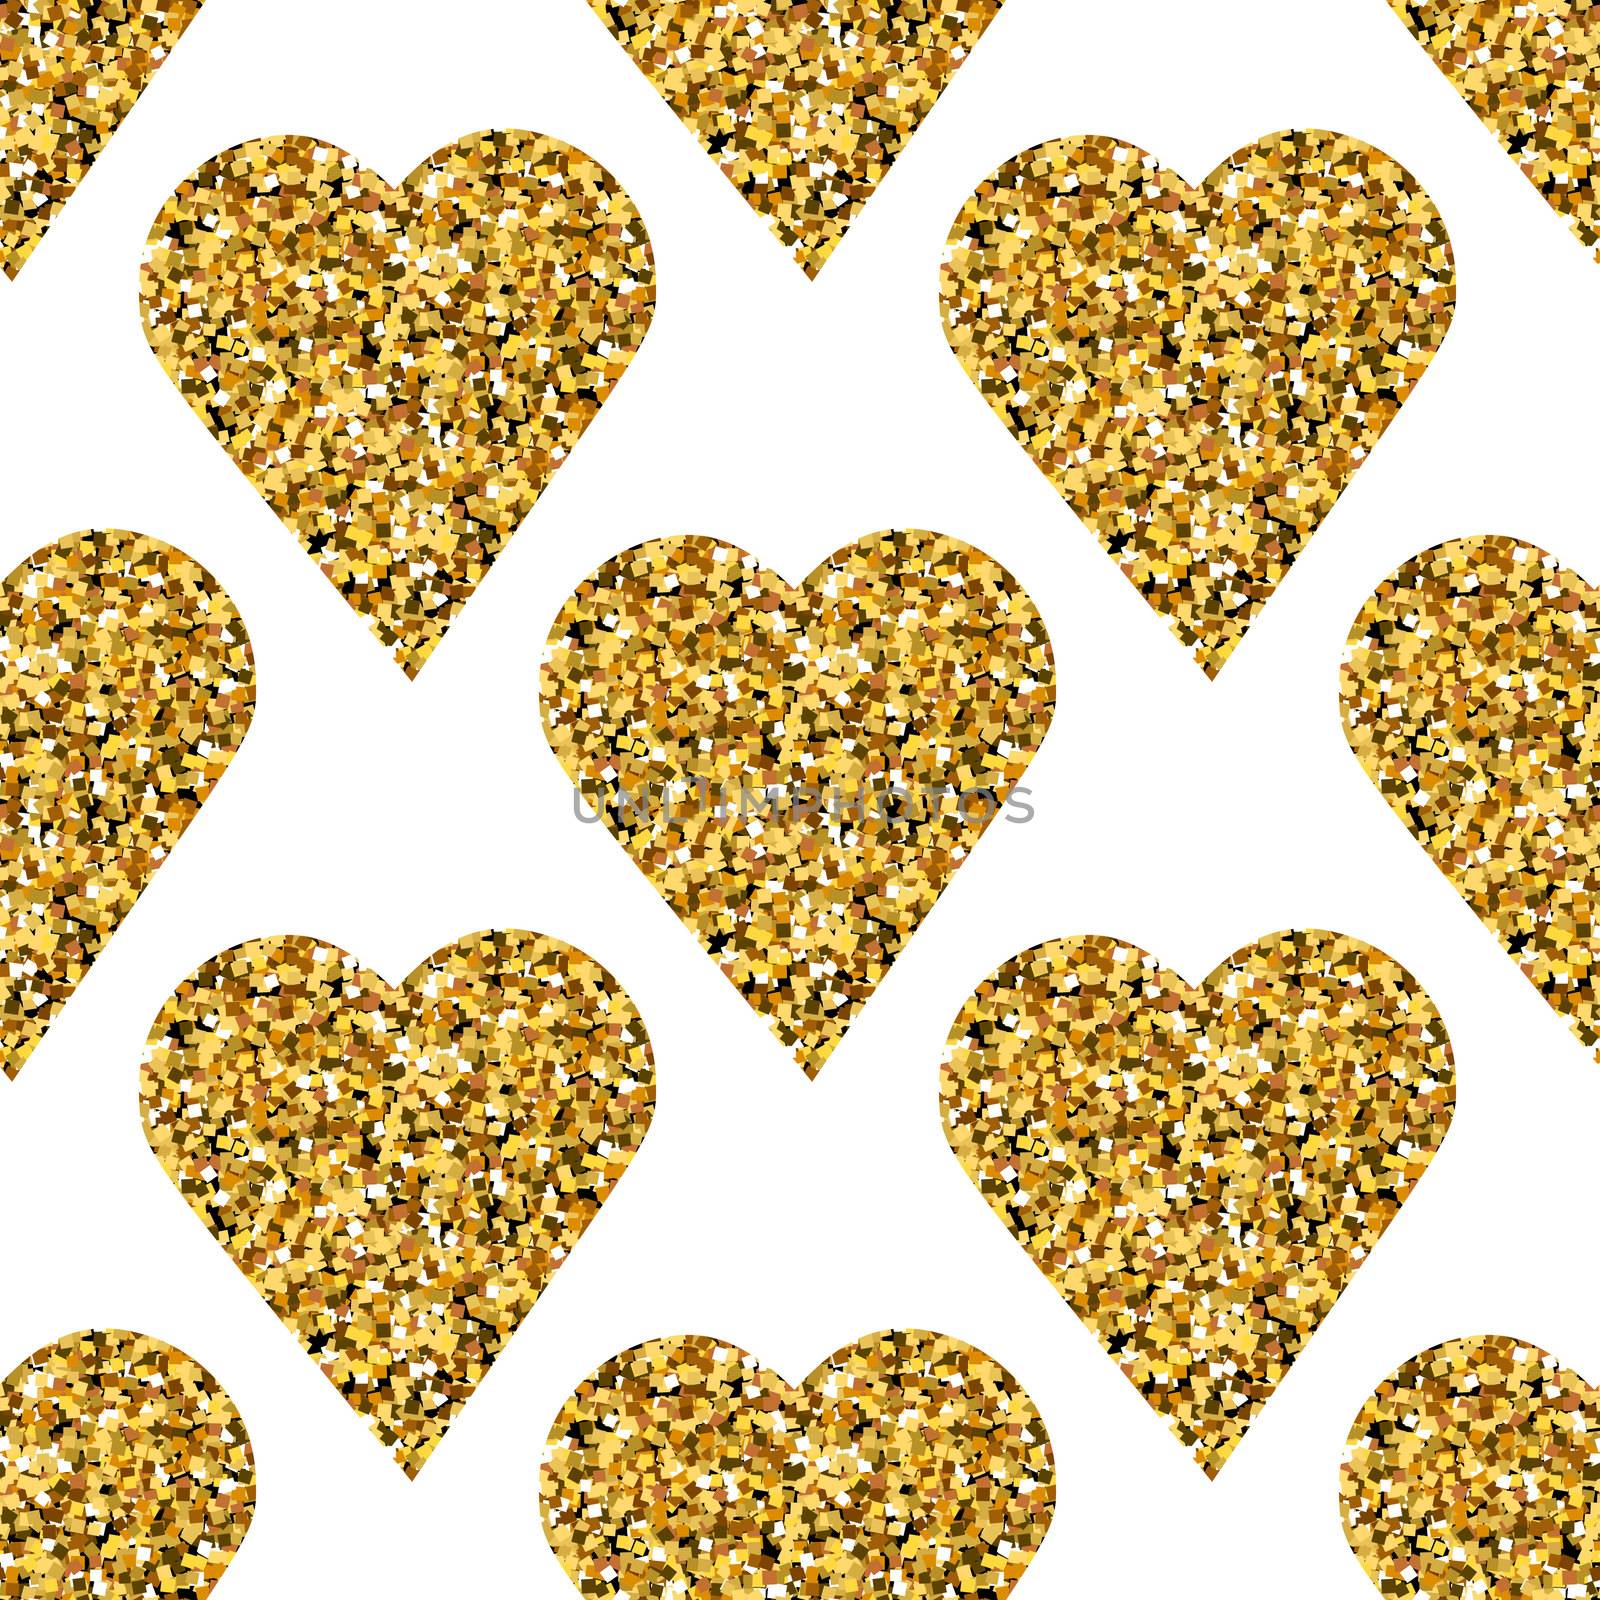 Gold hearts seamless pattern on white background. Fashion backdrop for print, poster, card. Golden vextor hearts texture.